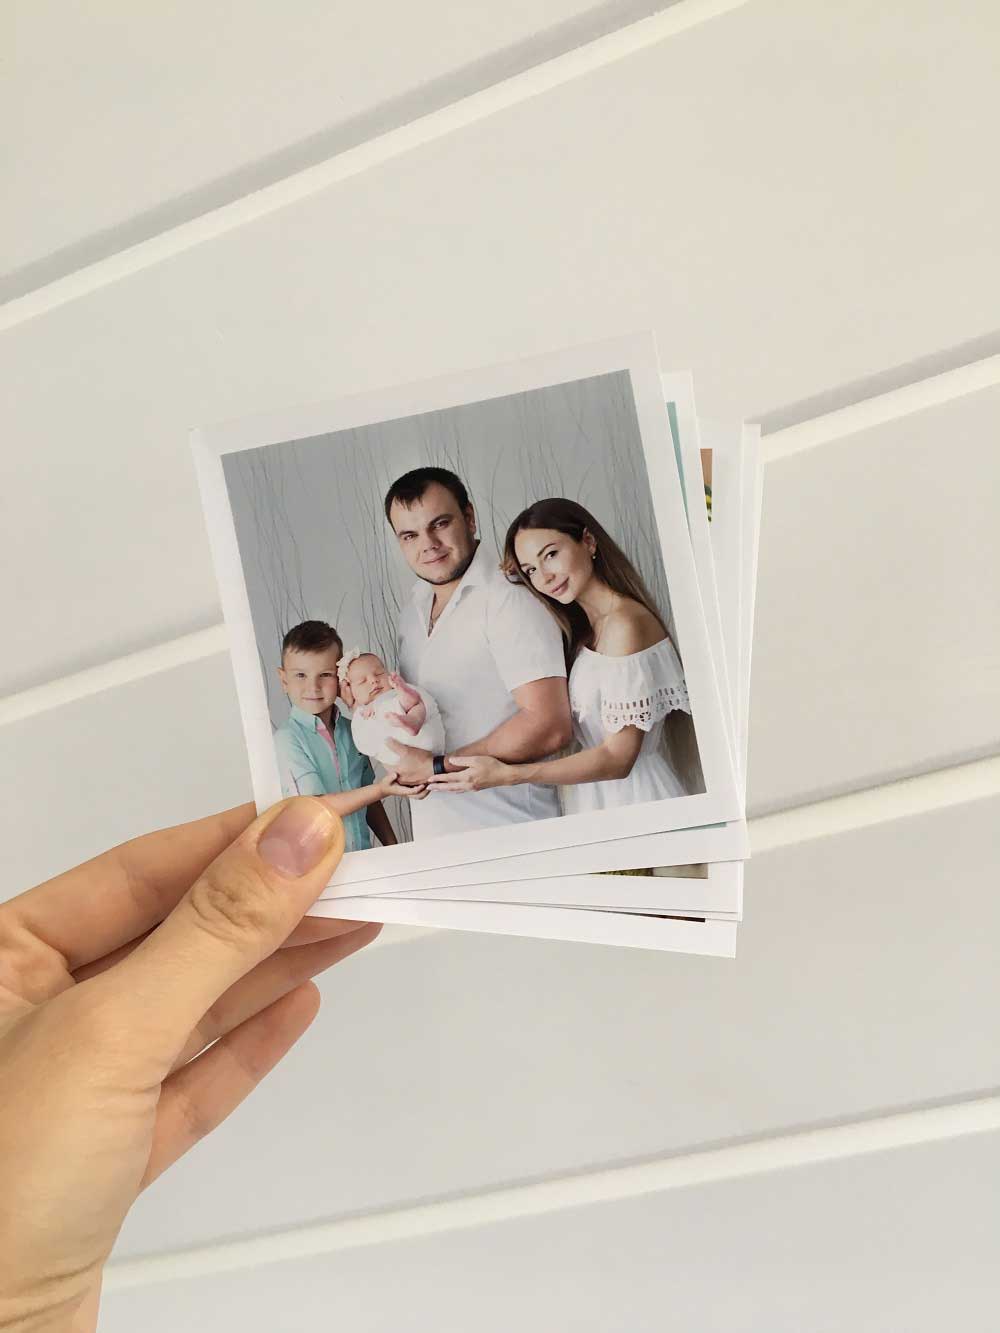 The paper printed out photos of happy family with the newborn baby